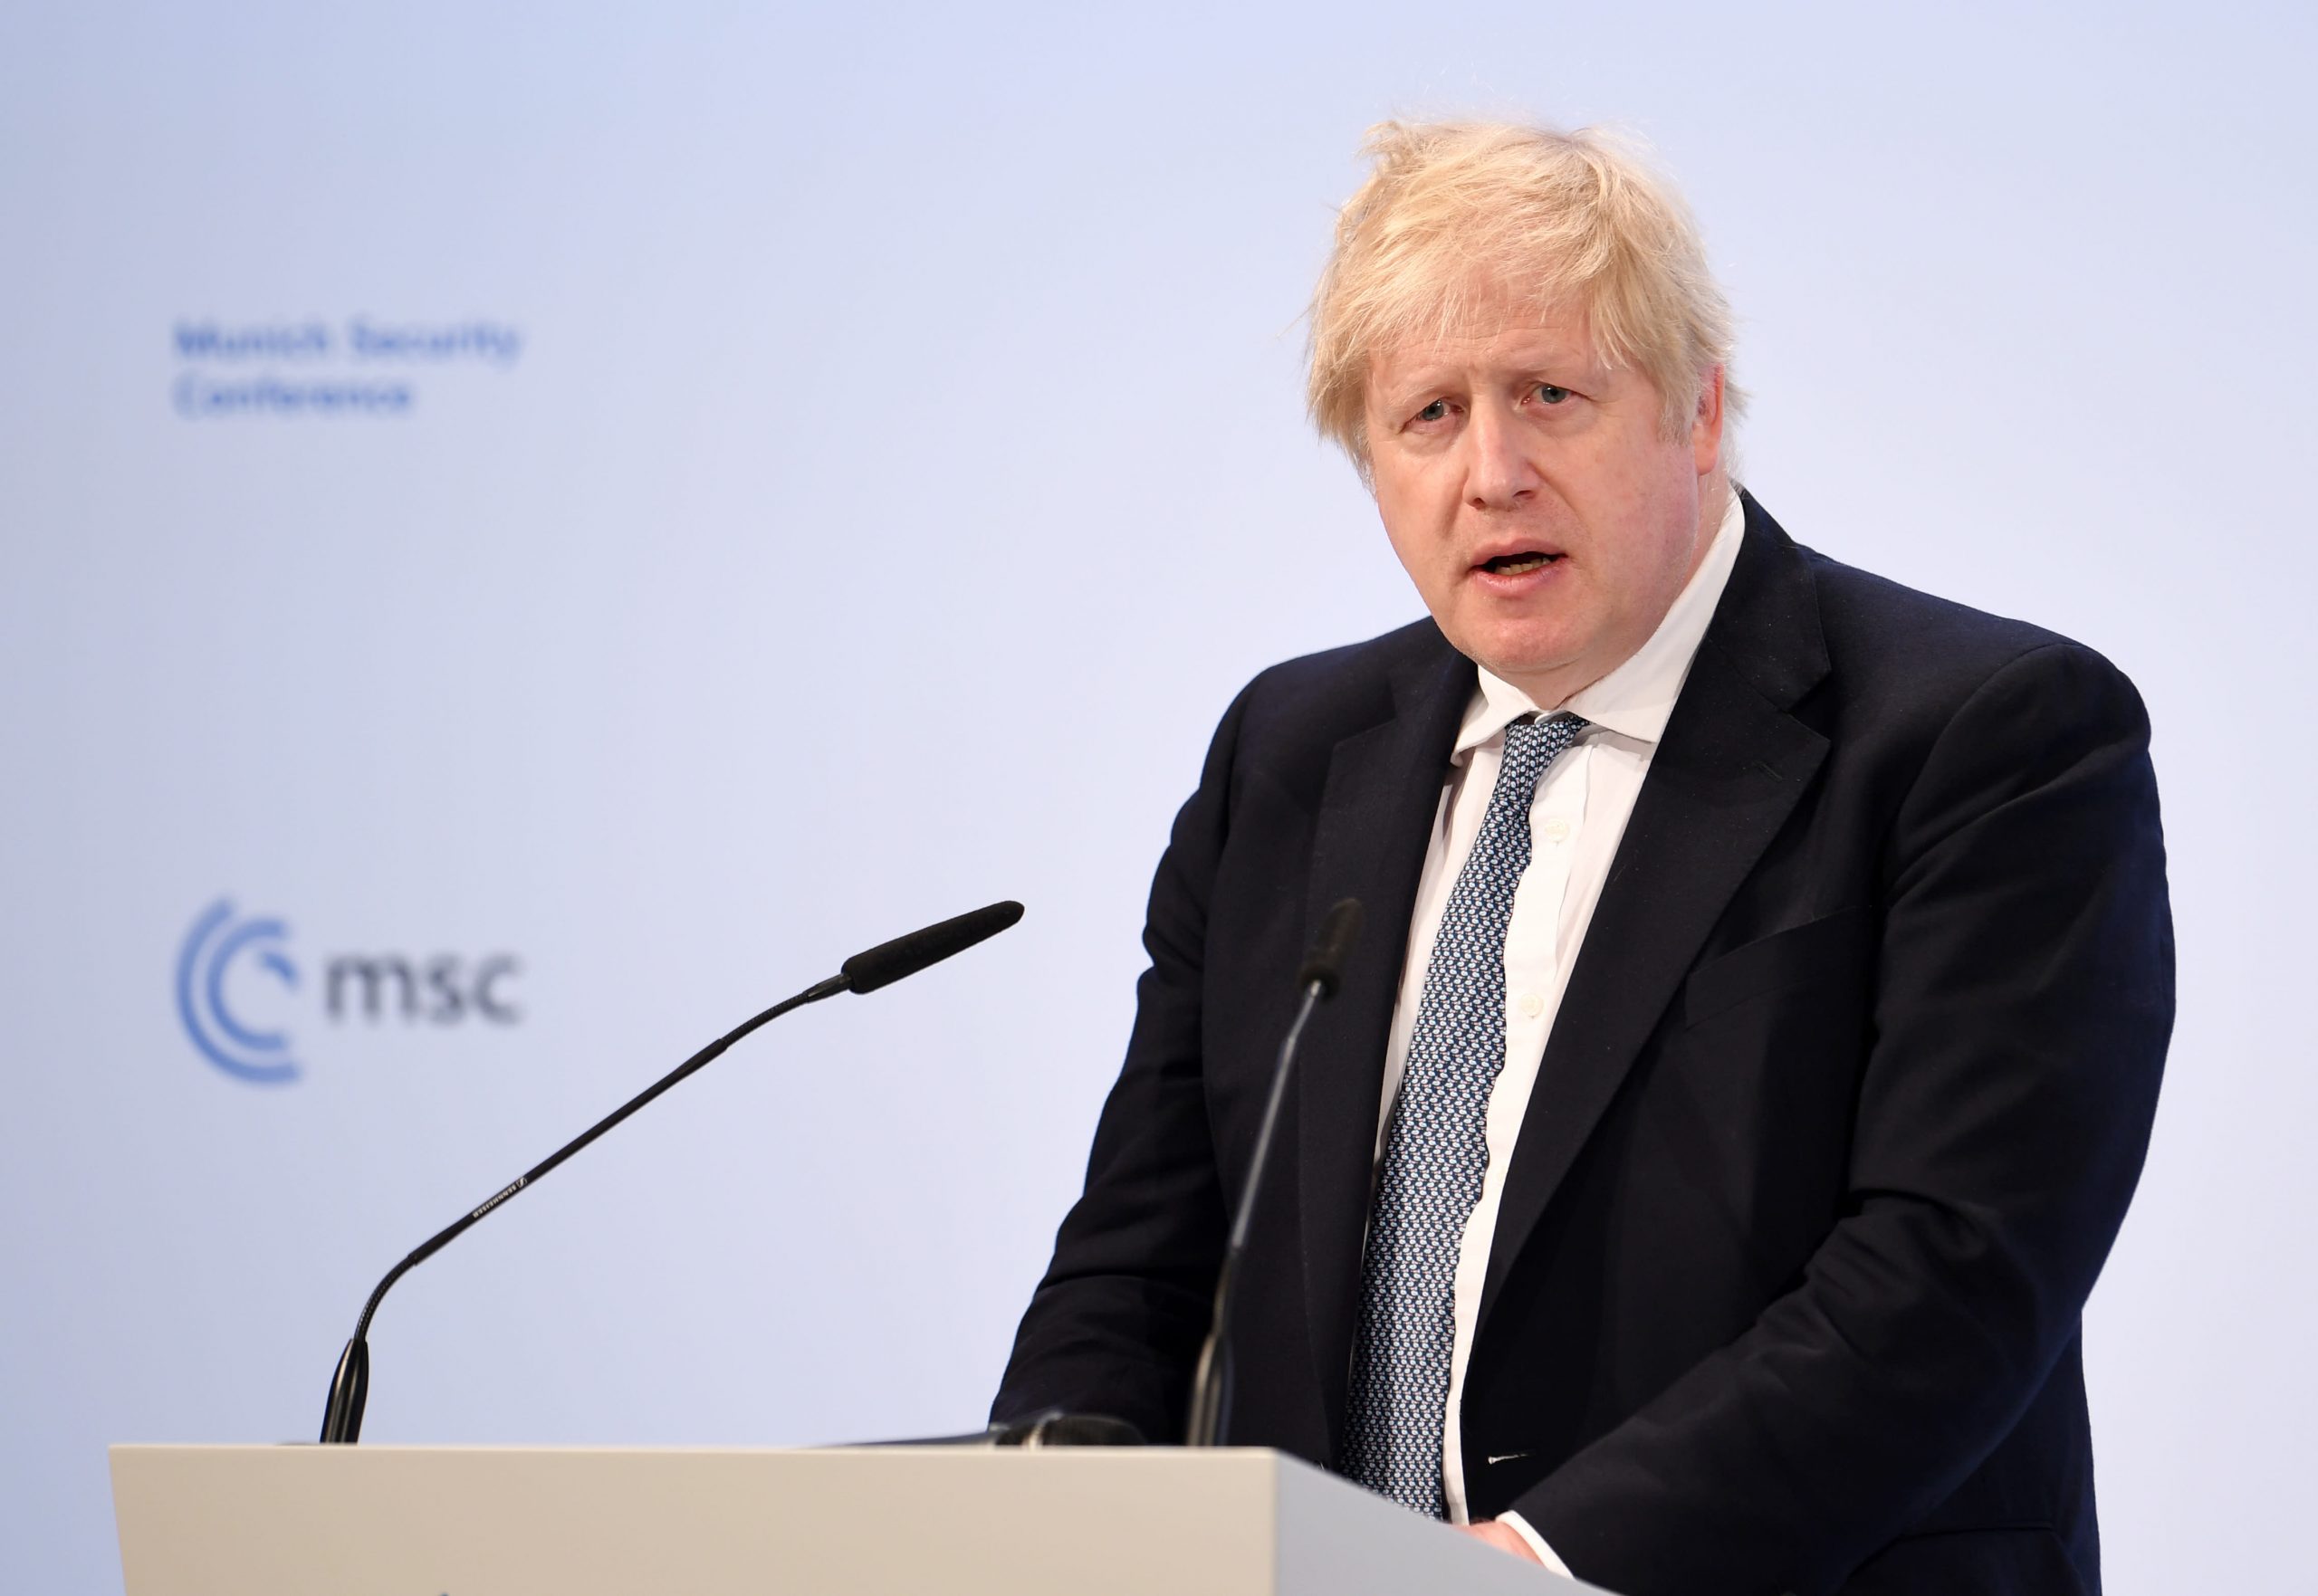 UK PM Boris Johnson to lift all remaining Covid restrictions in England